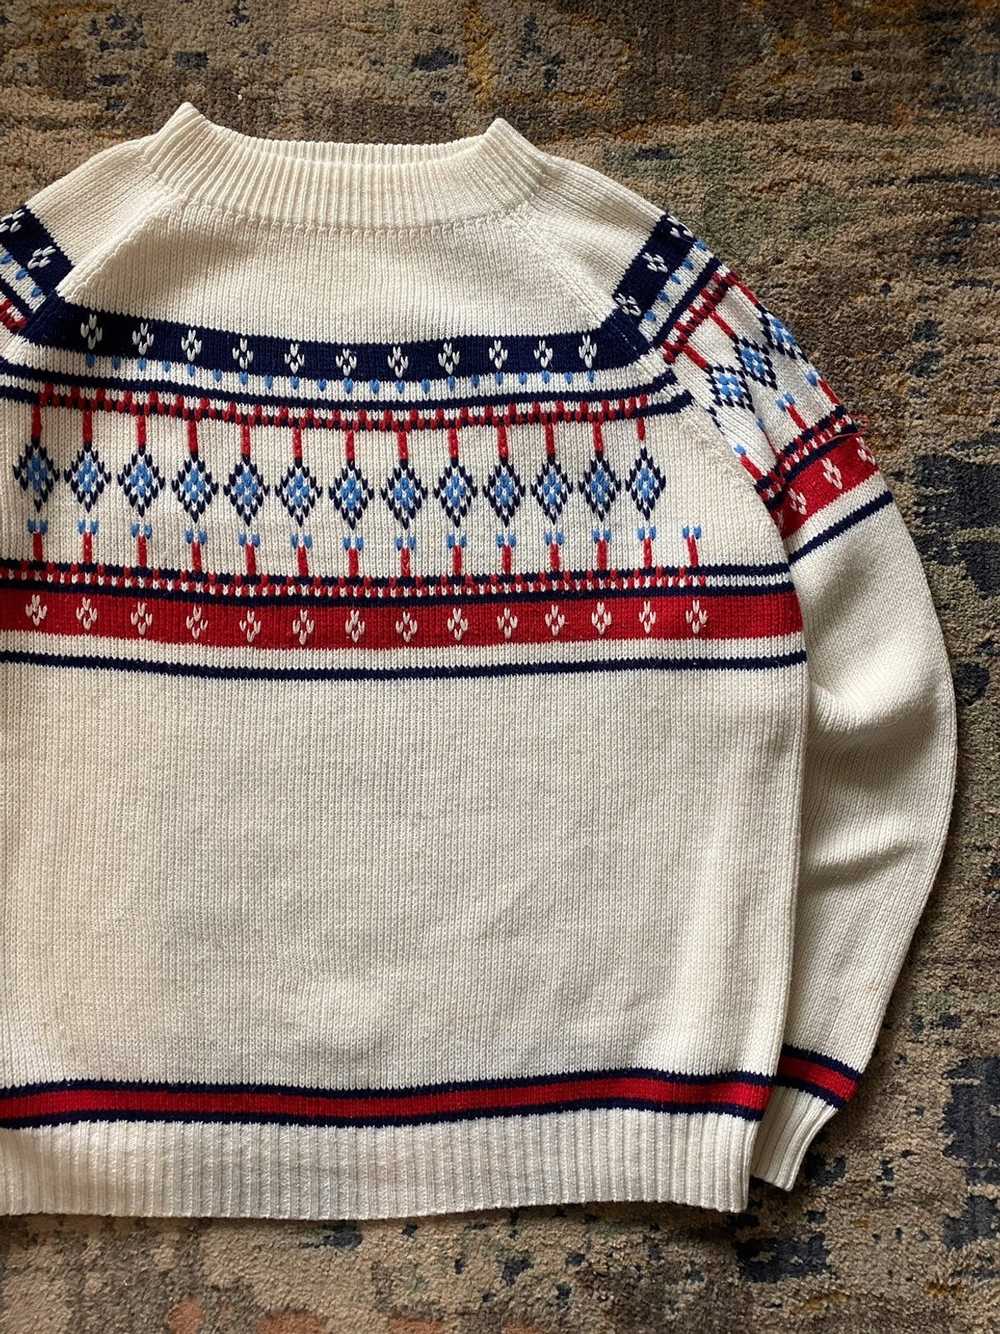 Vintage 1970’s Montgomery ward abstract sweater - image 2